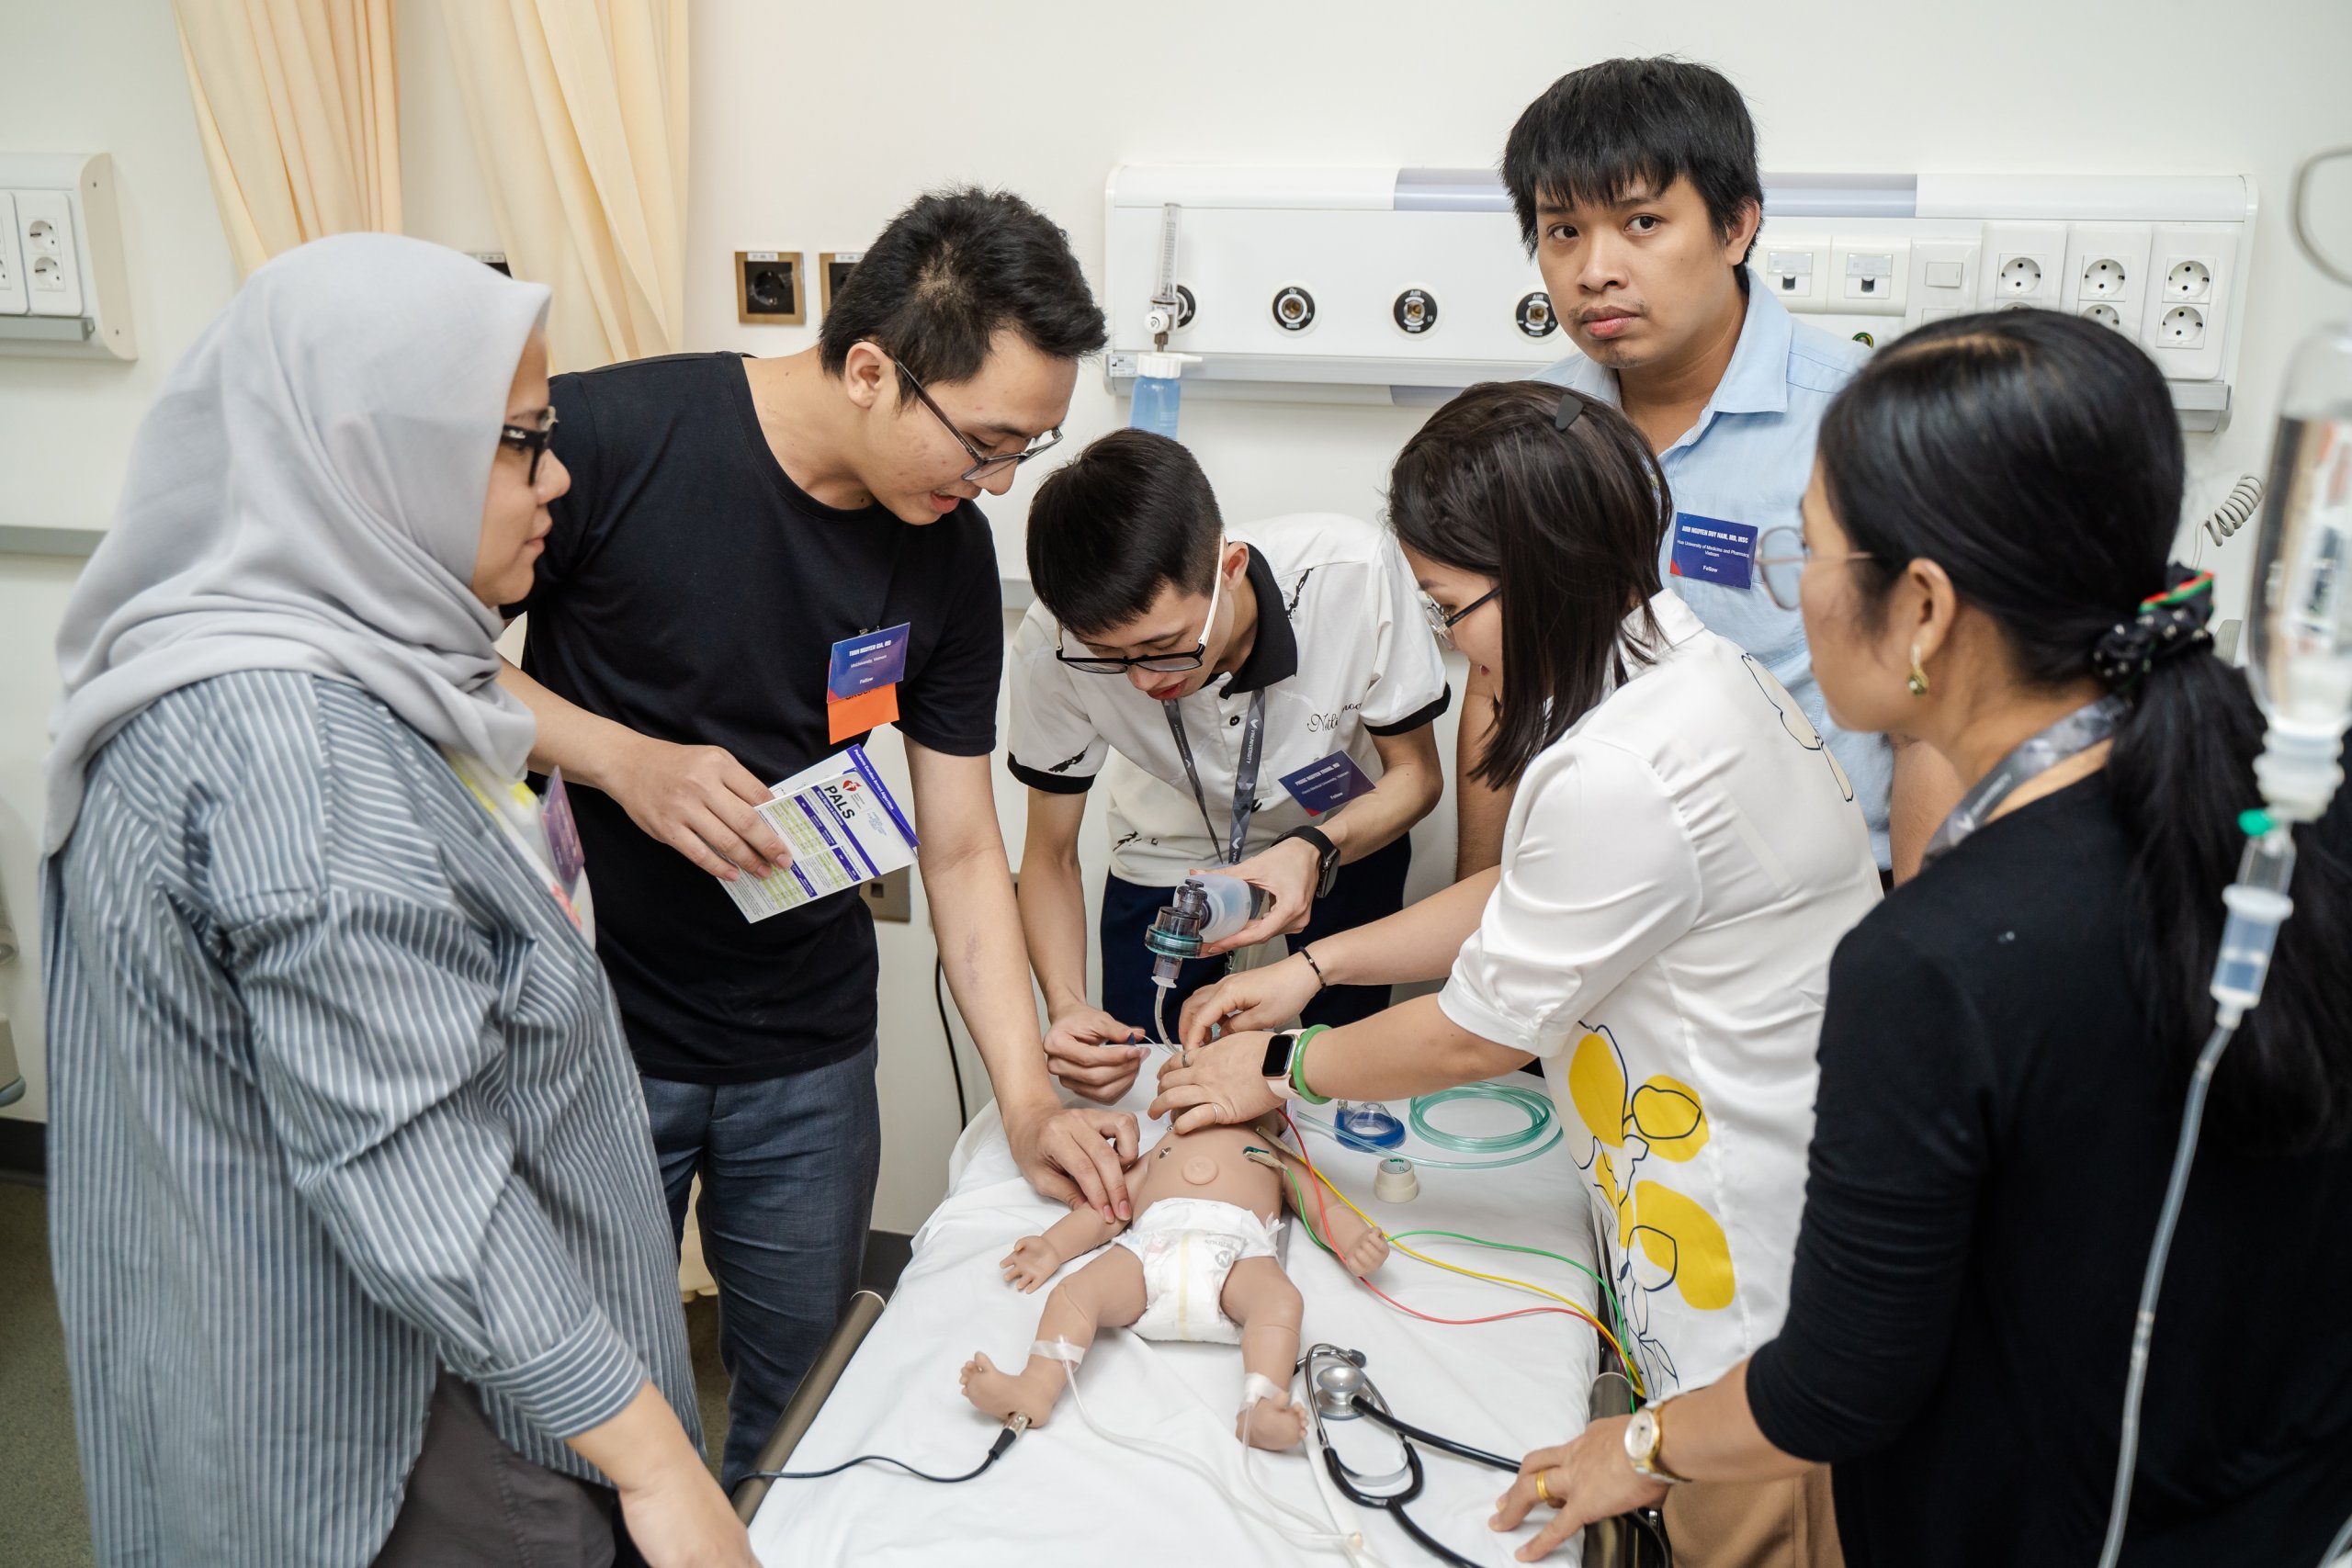 Fellows during the simulation training